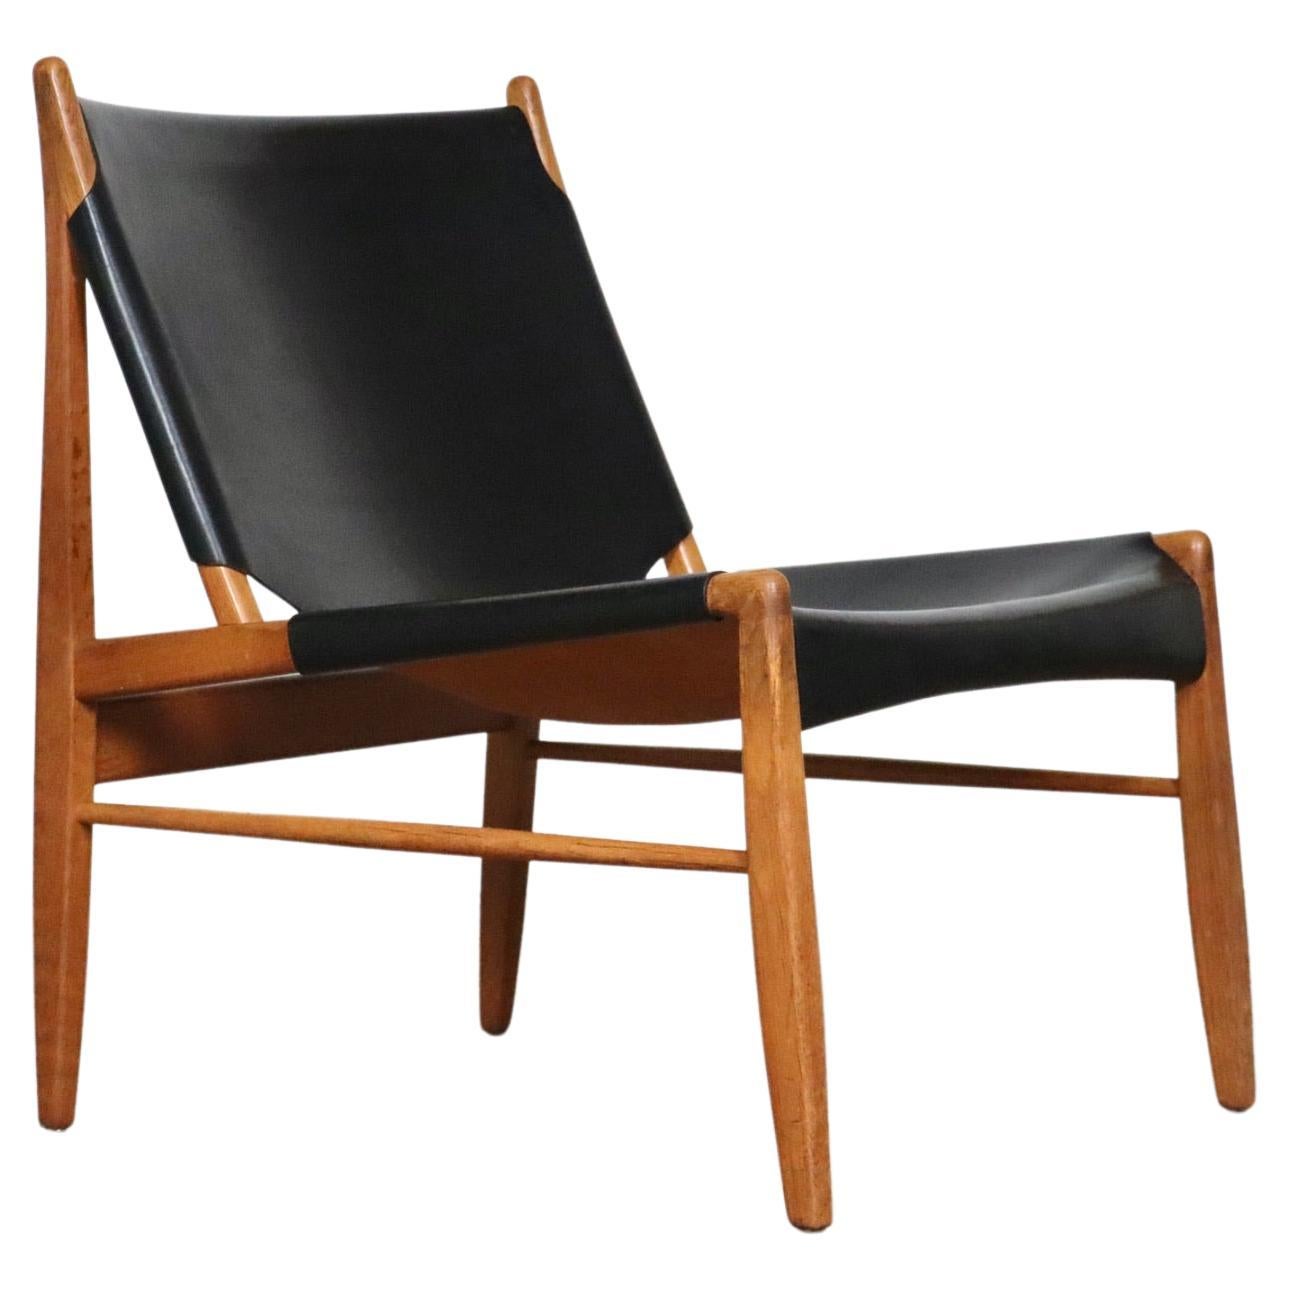 Chimney Lounge Chair Model 1192 By Franz Xaver Lutz For WK Möbel, 1958 For Sale